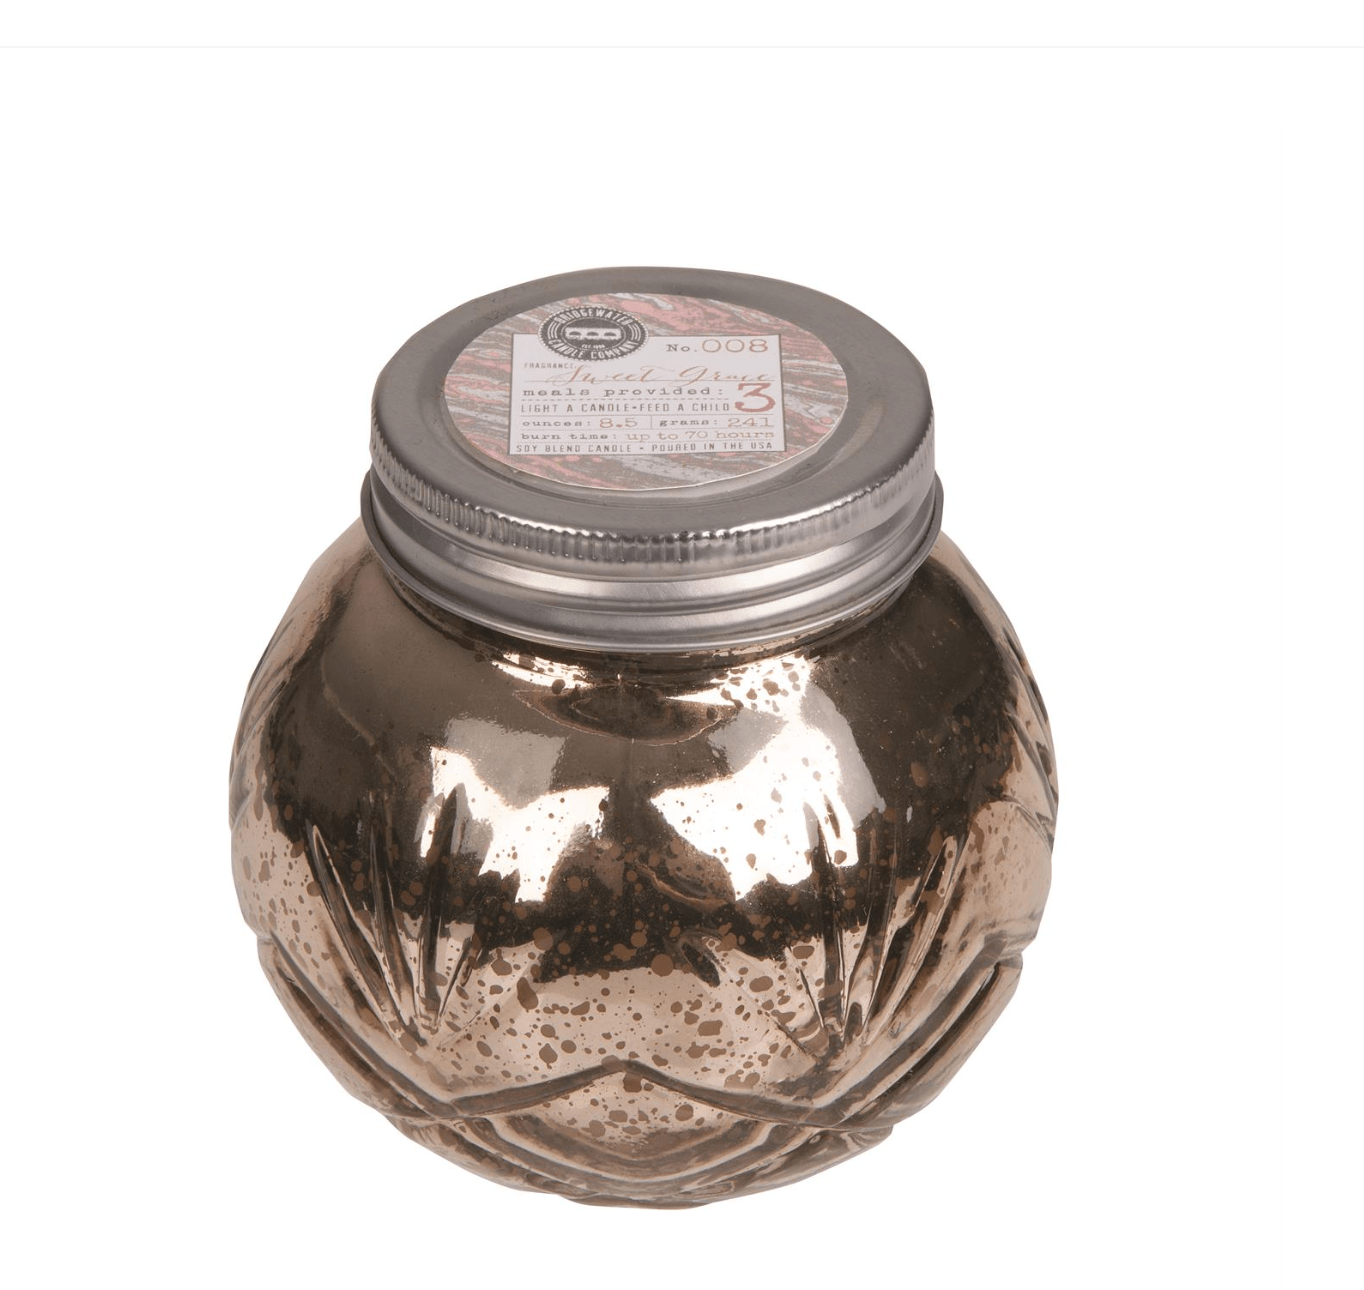 Envy Stylz Boutique Fragrance - Candle Blush-toned Bridgewater Sweet Grace Small Candle